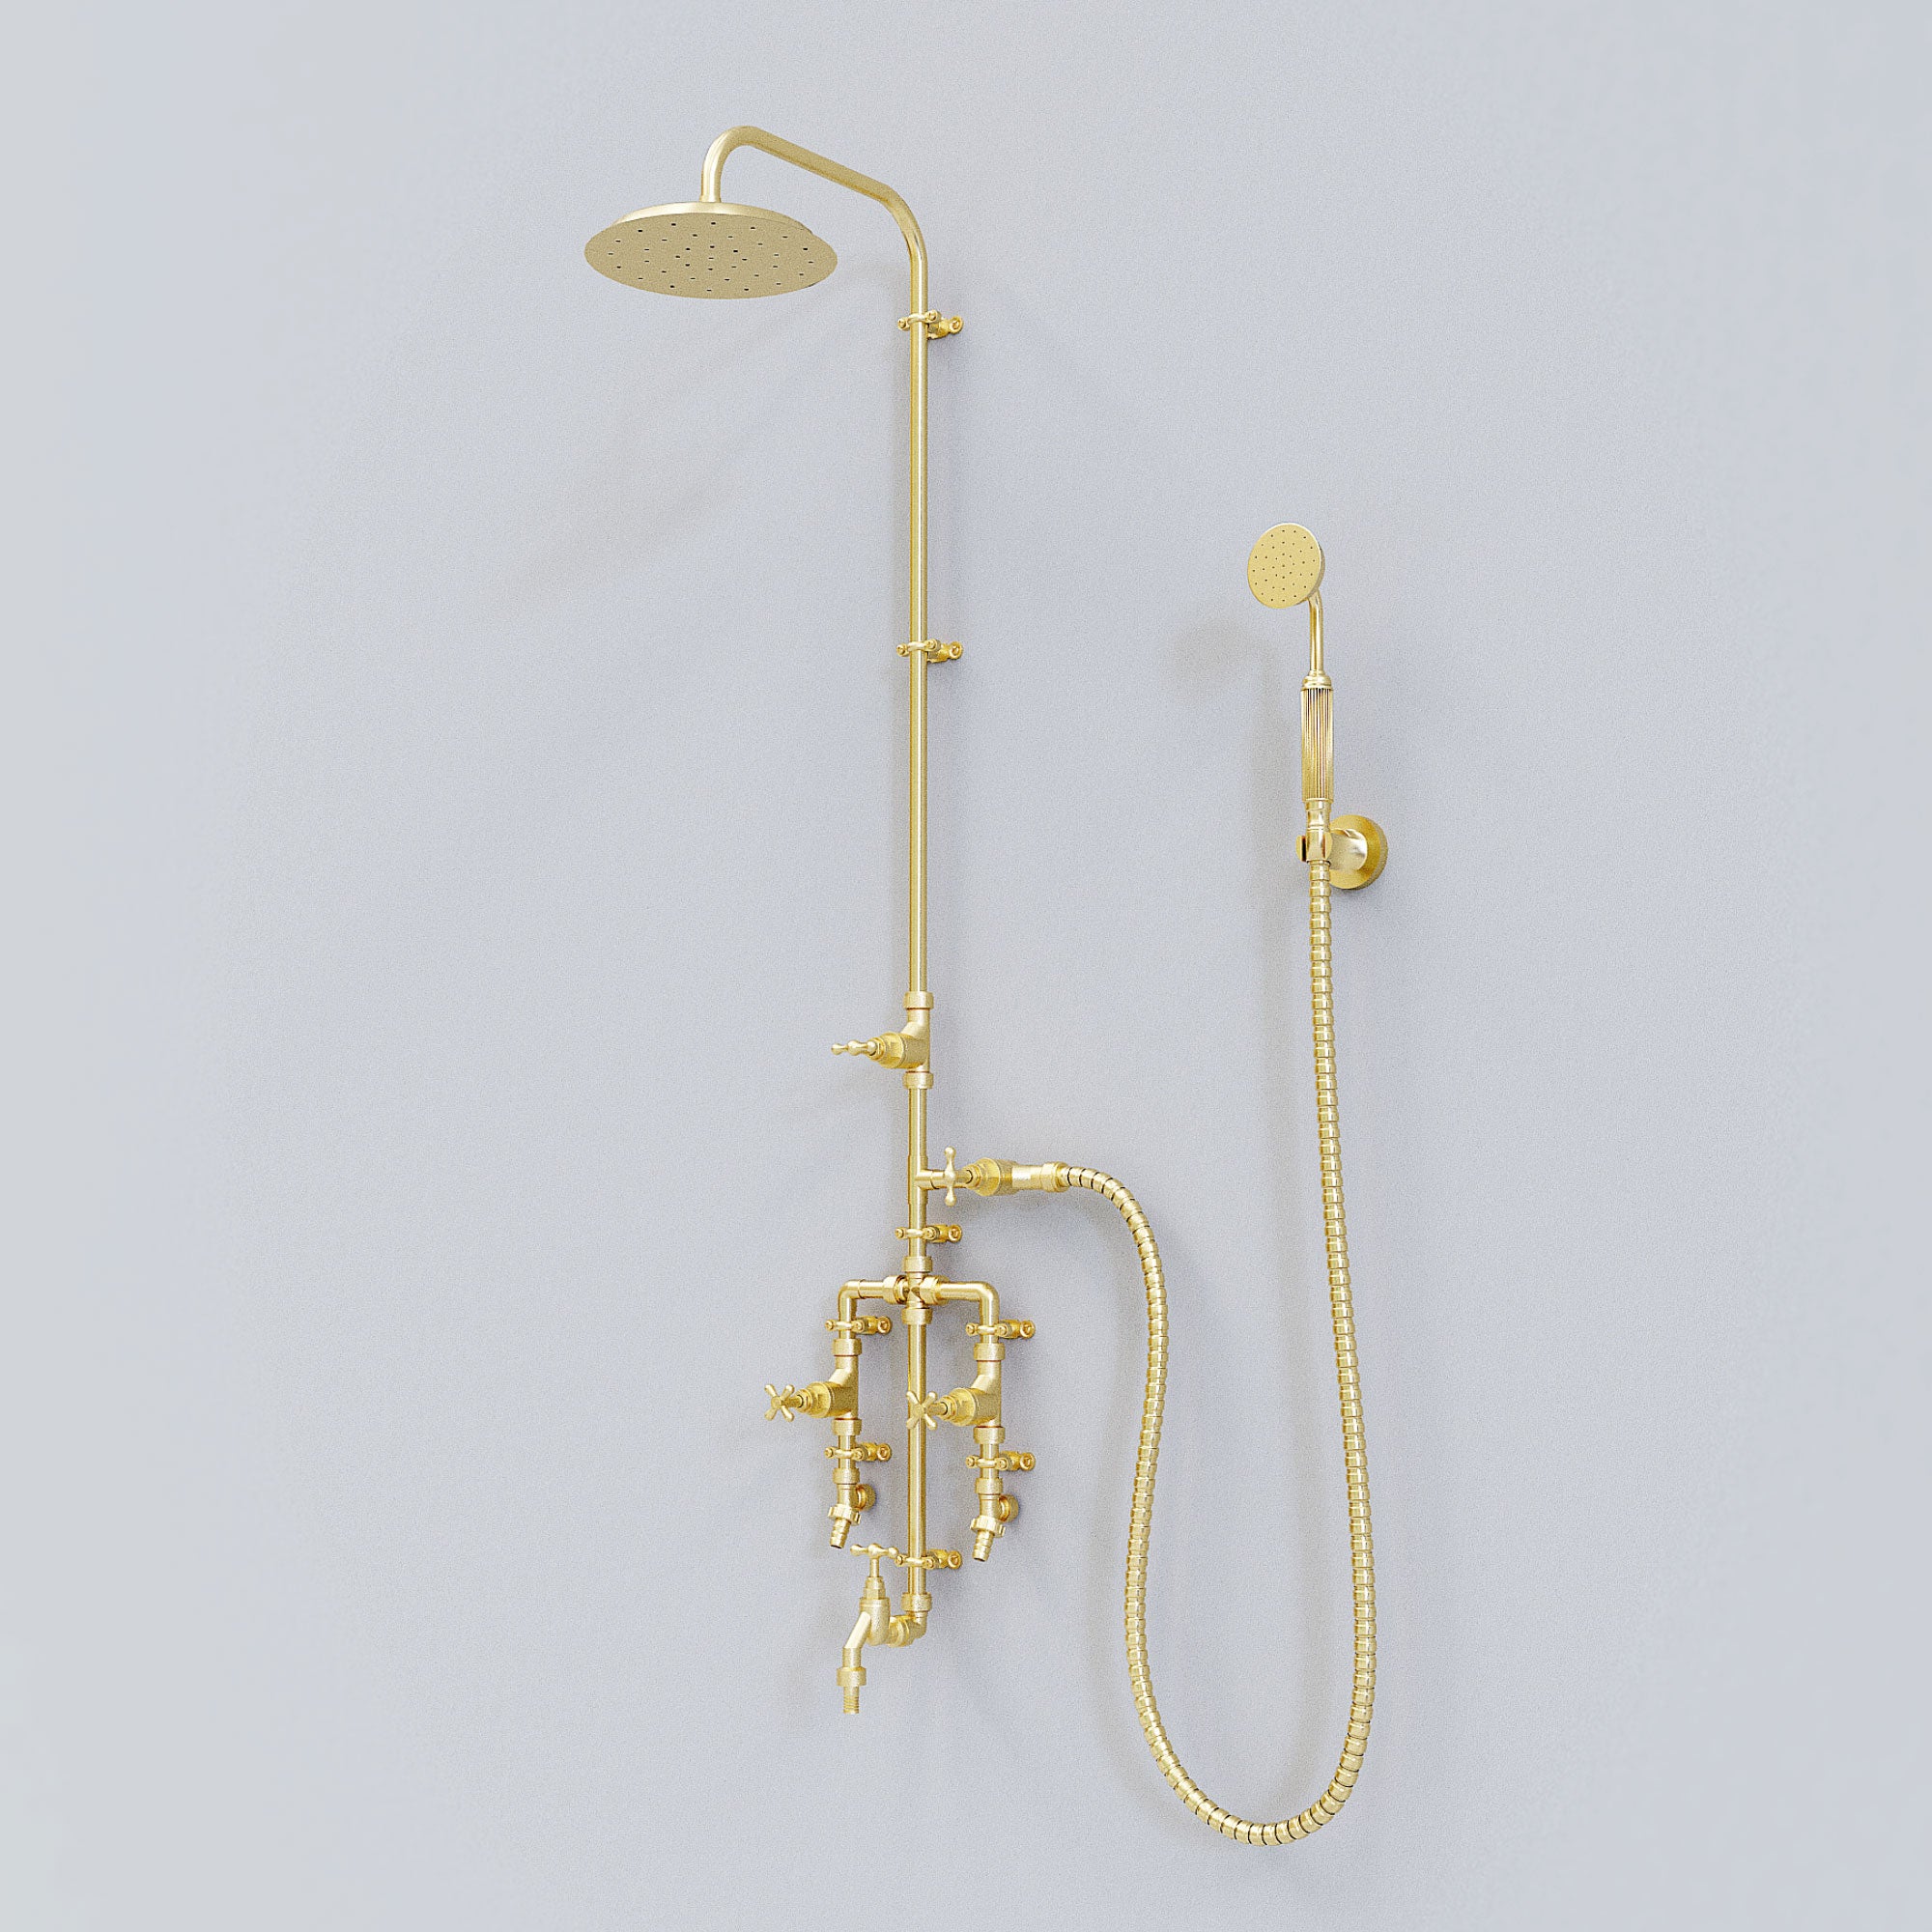 Seducto fully brass shower on white wall